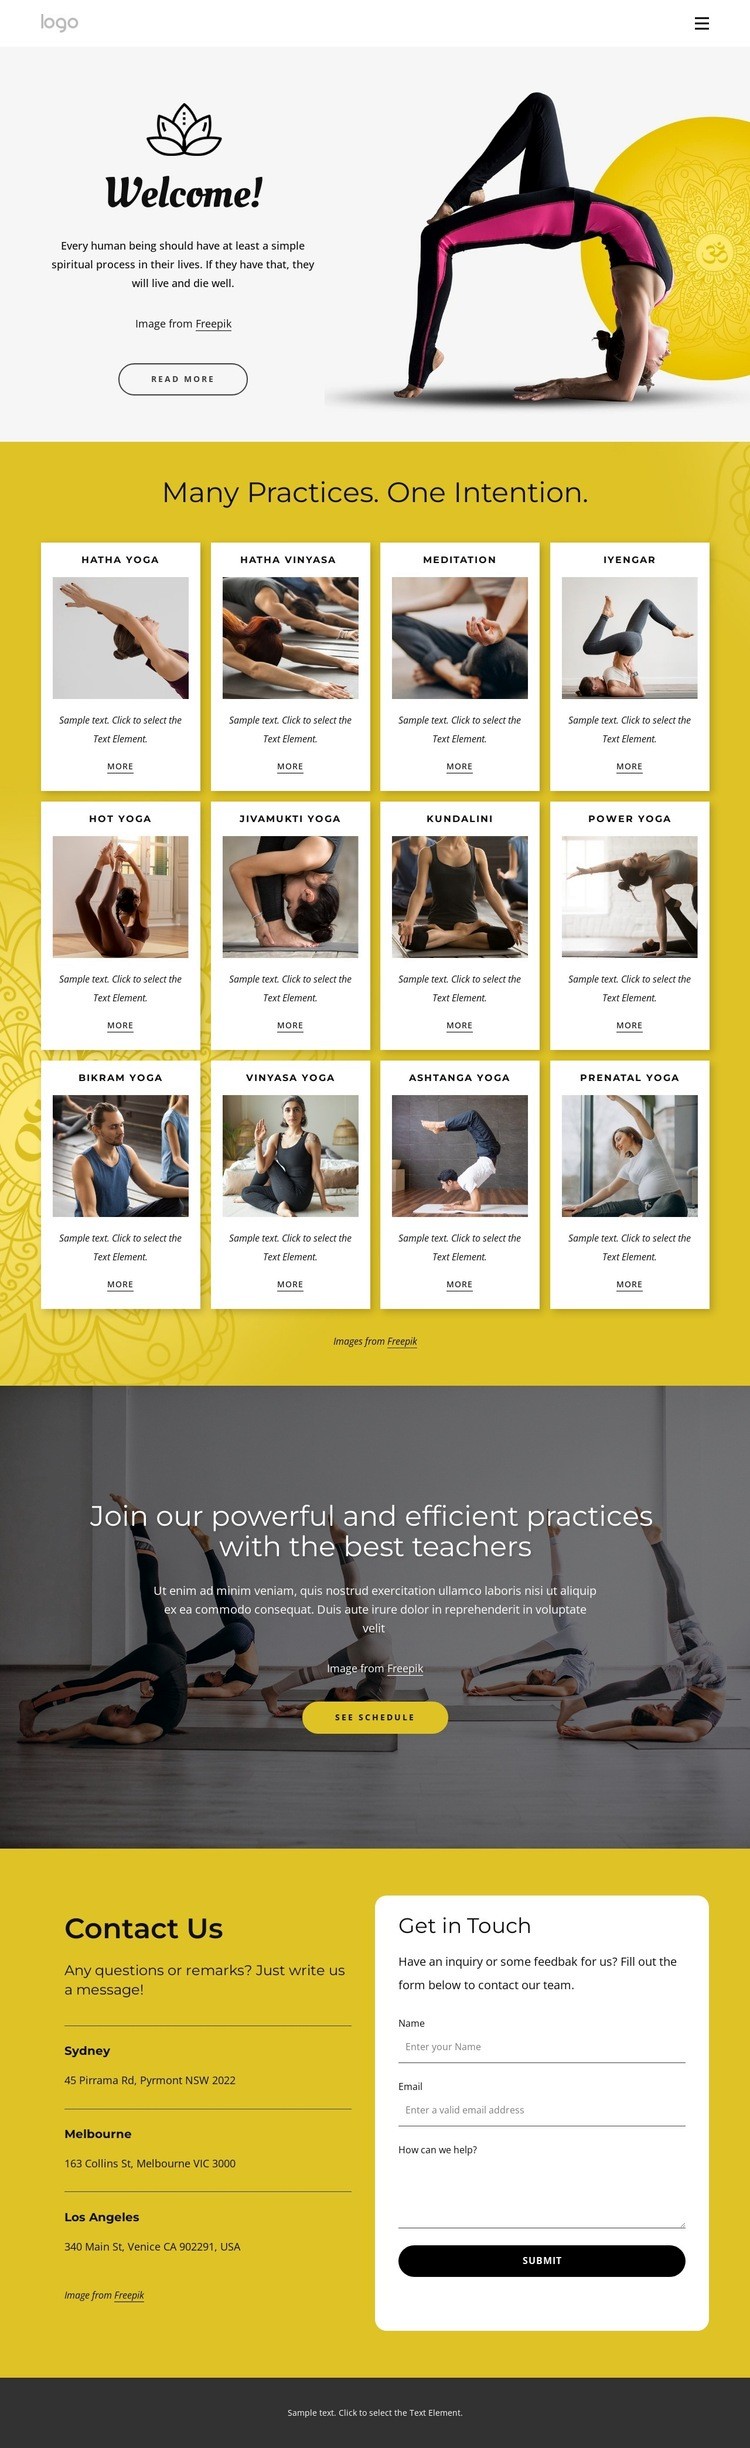 Powerful yoga practices Homepage Design